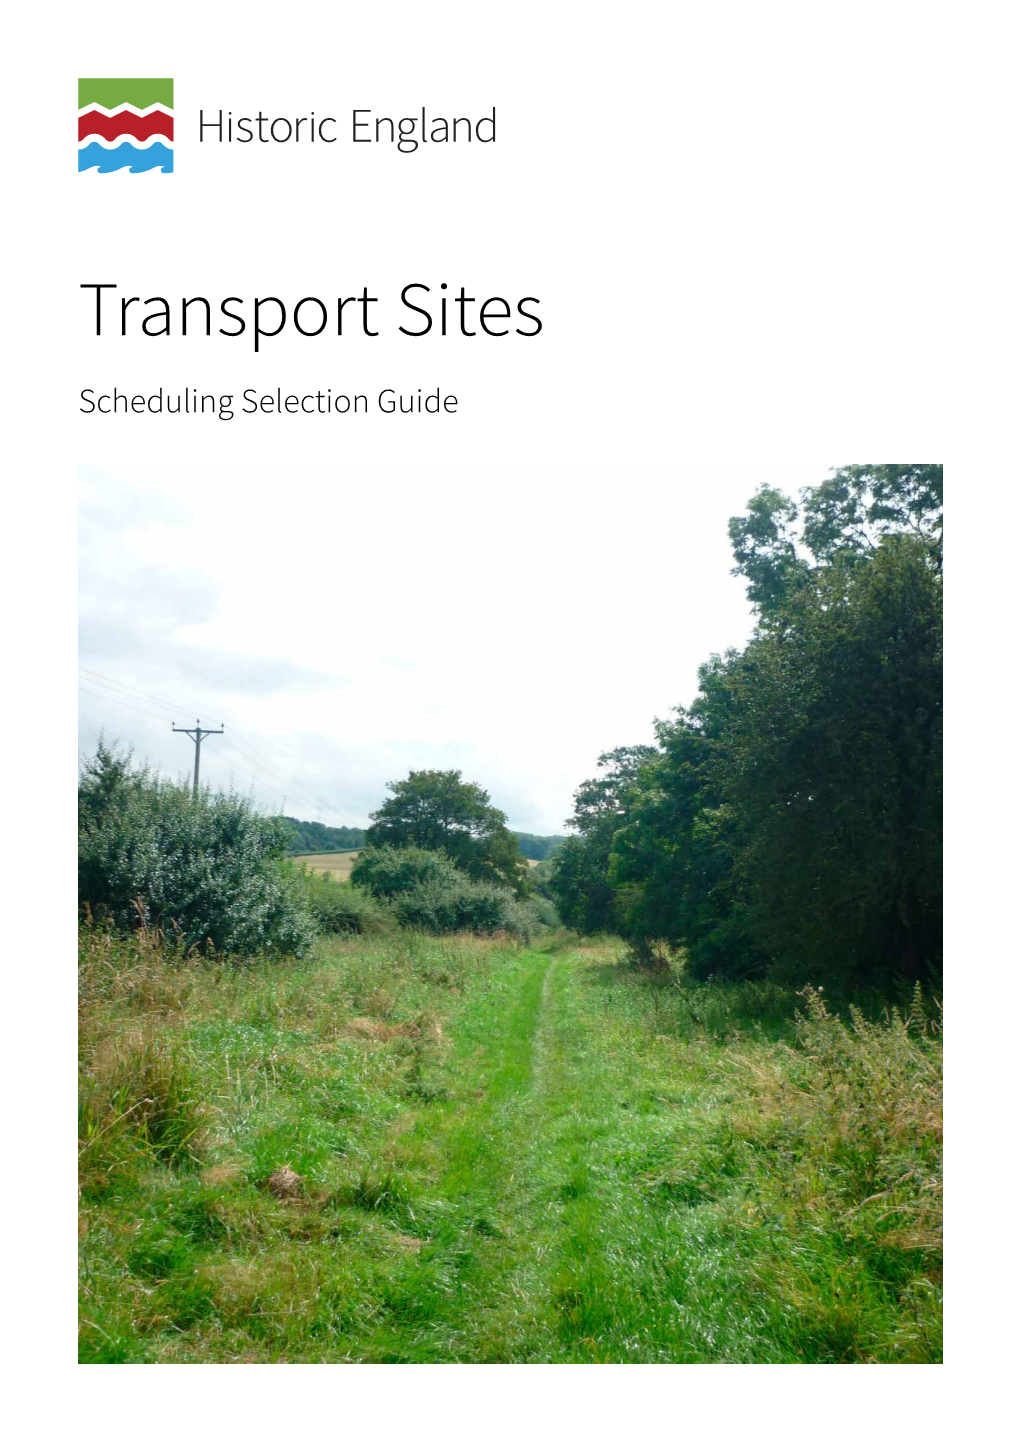 Transport Sites Scheduling Selection Guide Summary